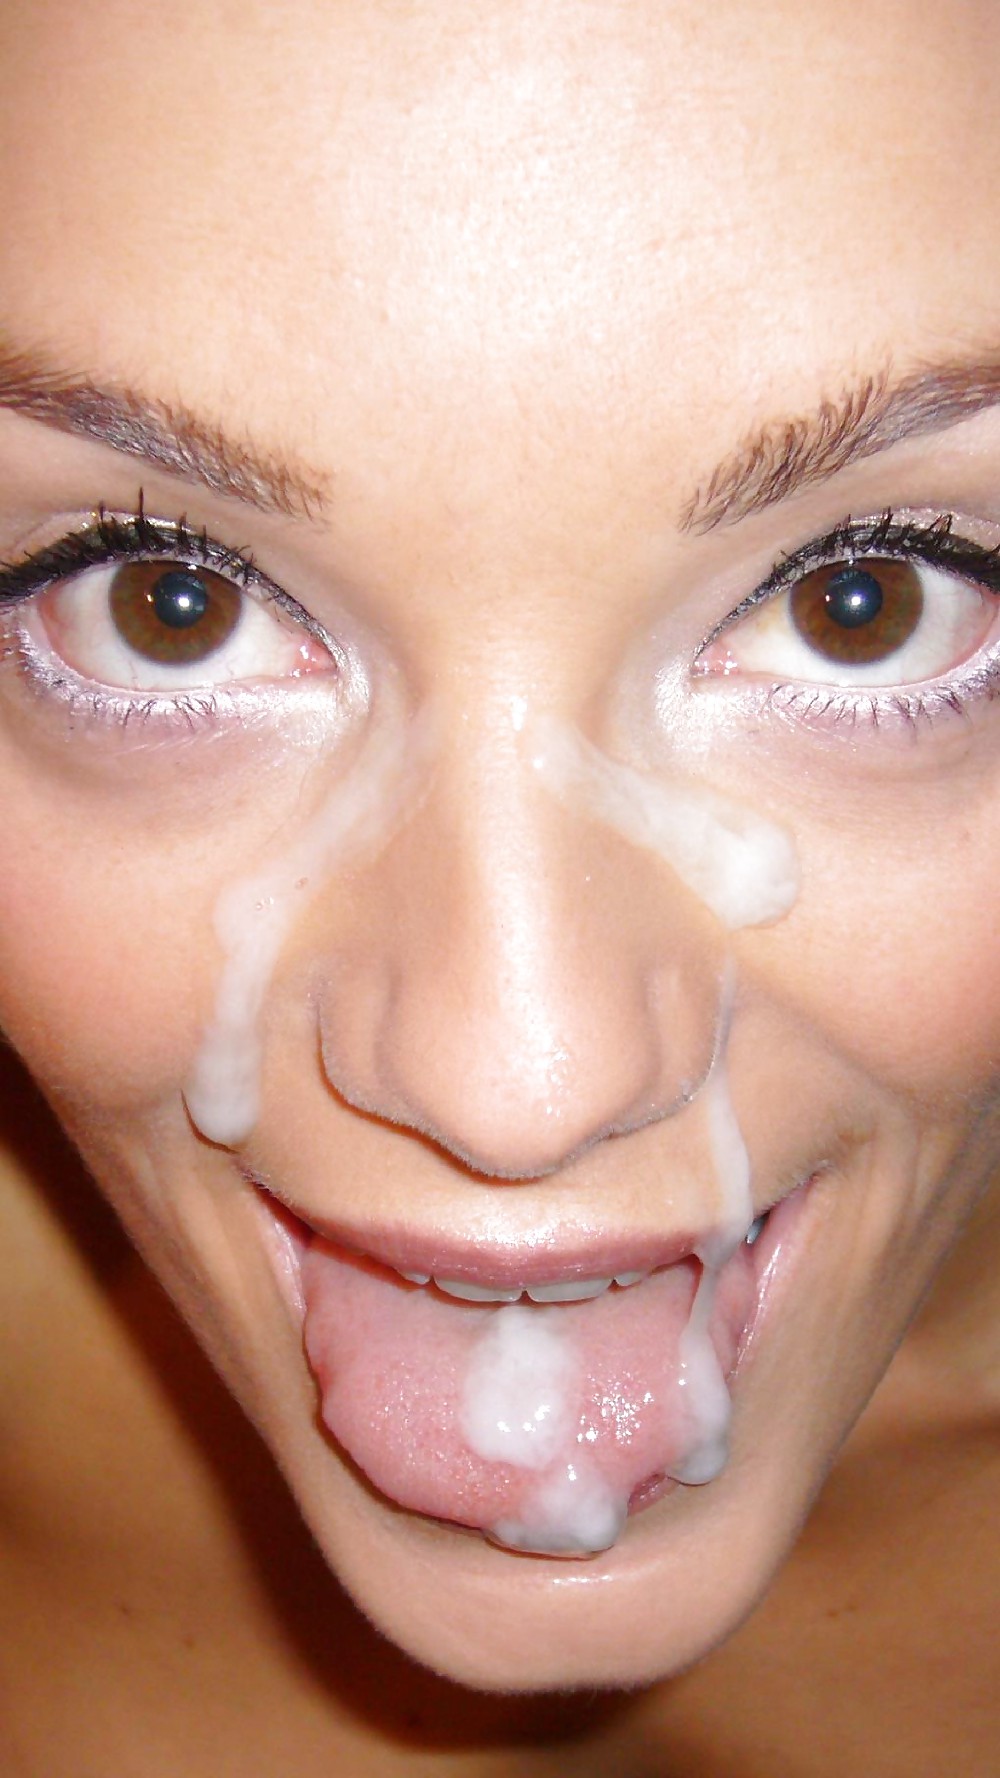 Cum leaks out from beautiful mouths and faces 6 (Camaster)